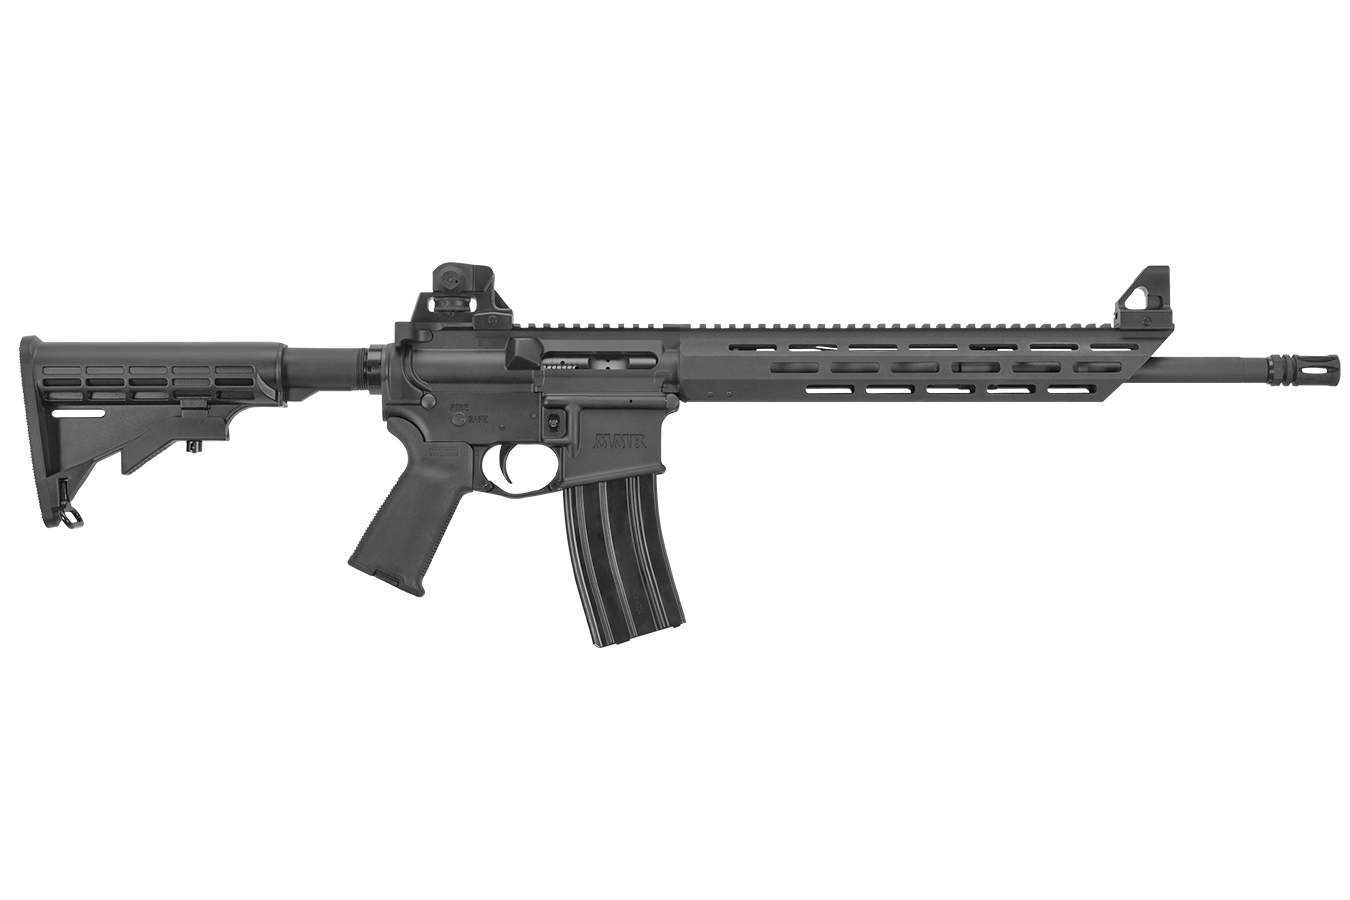 MMR 5.56MM NATO CARBINE RIFLE WITH 6-POSITION ADJUSTABLE STOCK